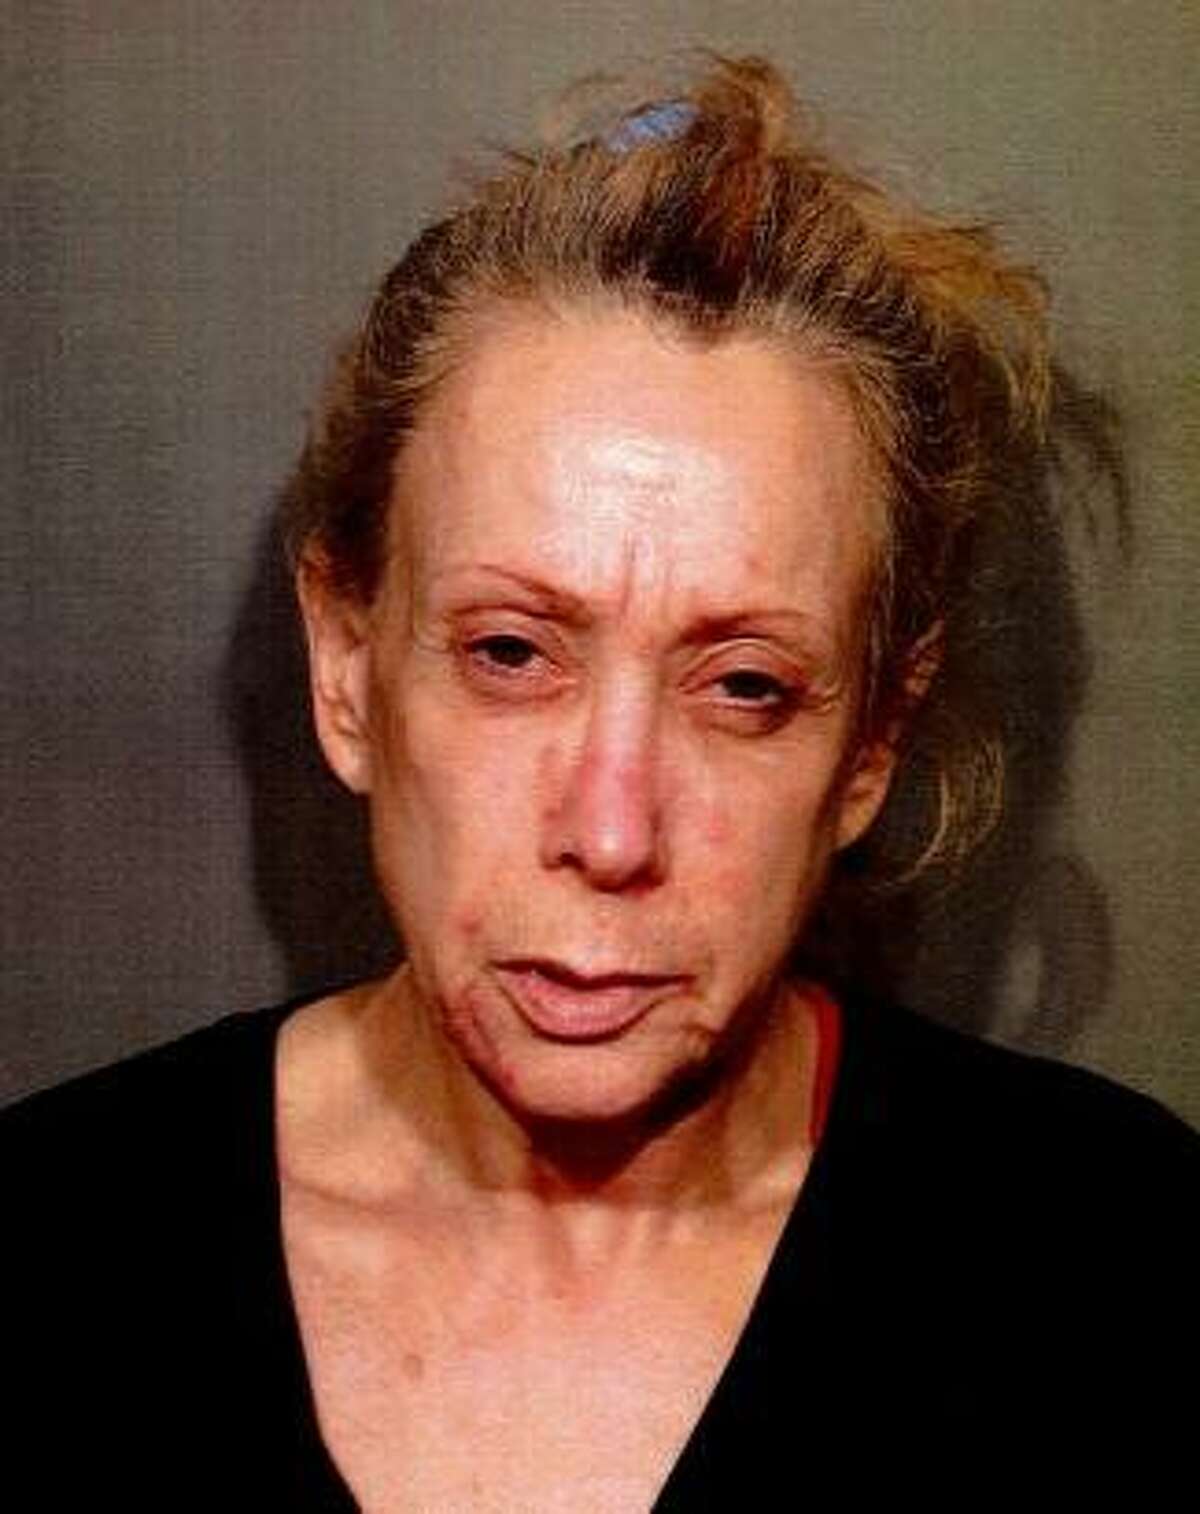 Sheryl Moroch, 56, of Milport Avenue in New Canaan, Conn. was charged with sixth-degree larceny on Oct. 25, 2017.